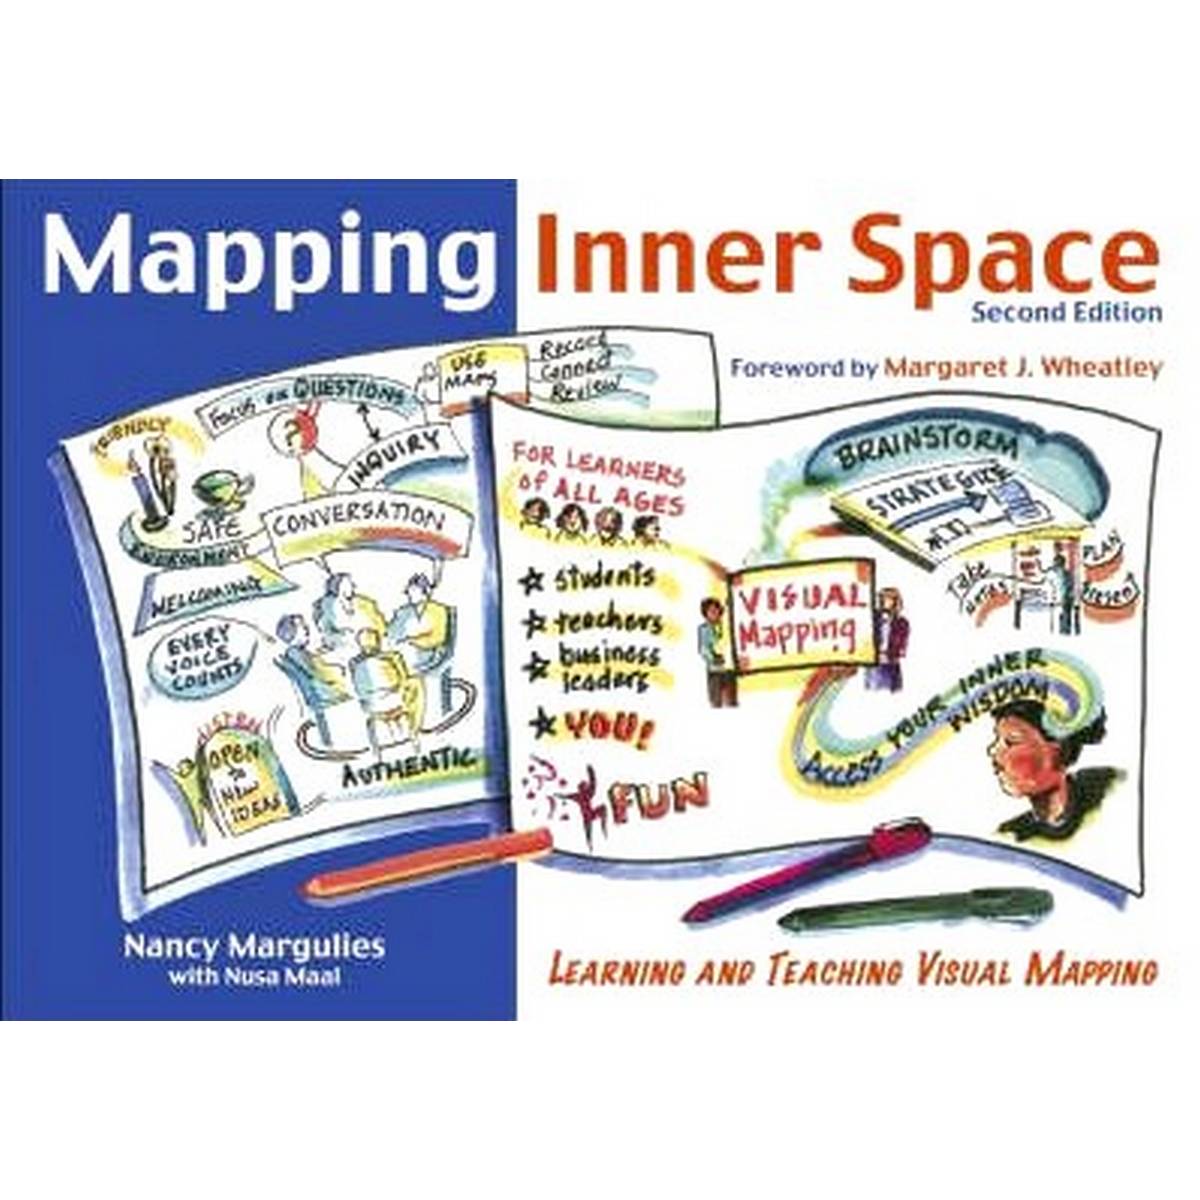 Mapping Inner Space (2nd Edition)